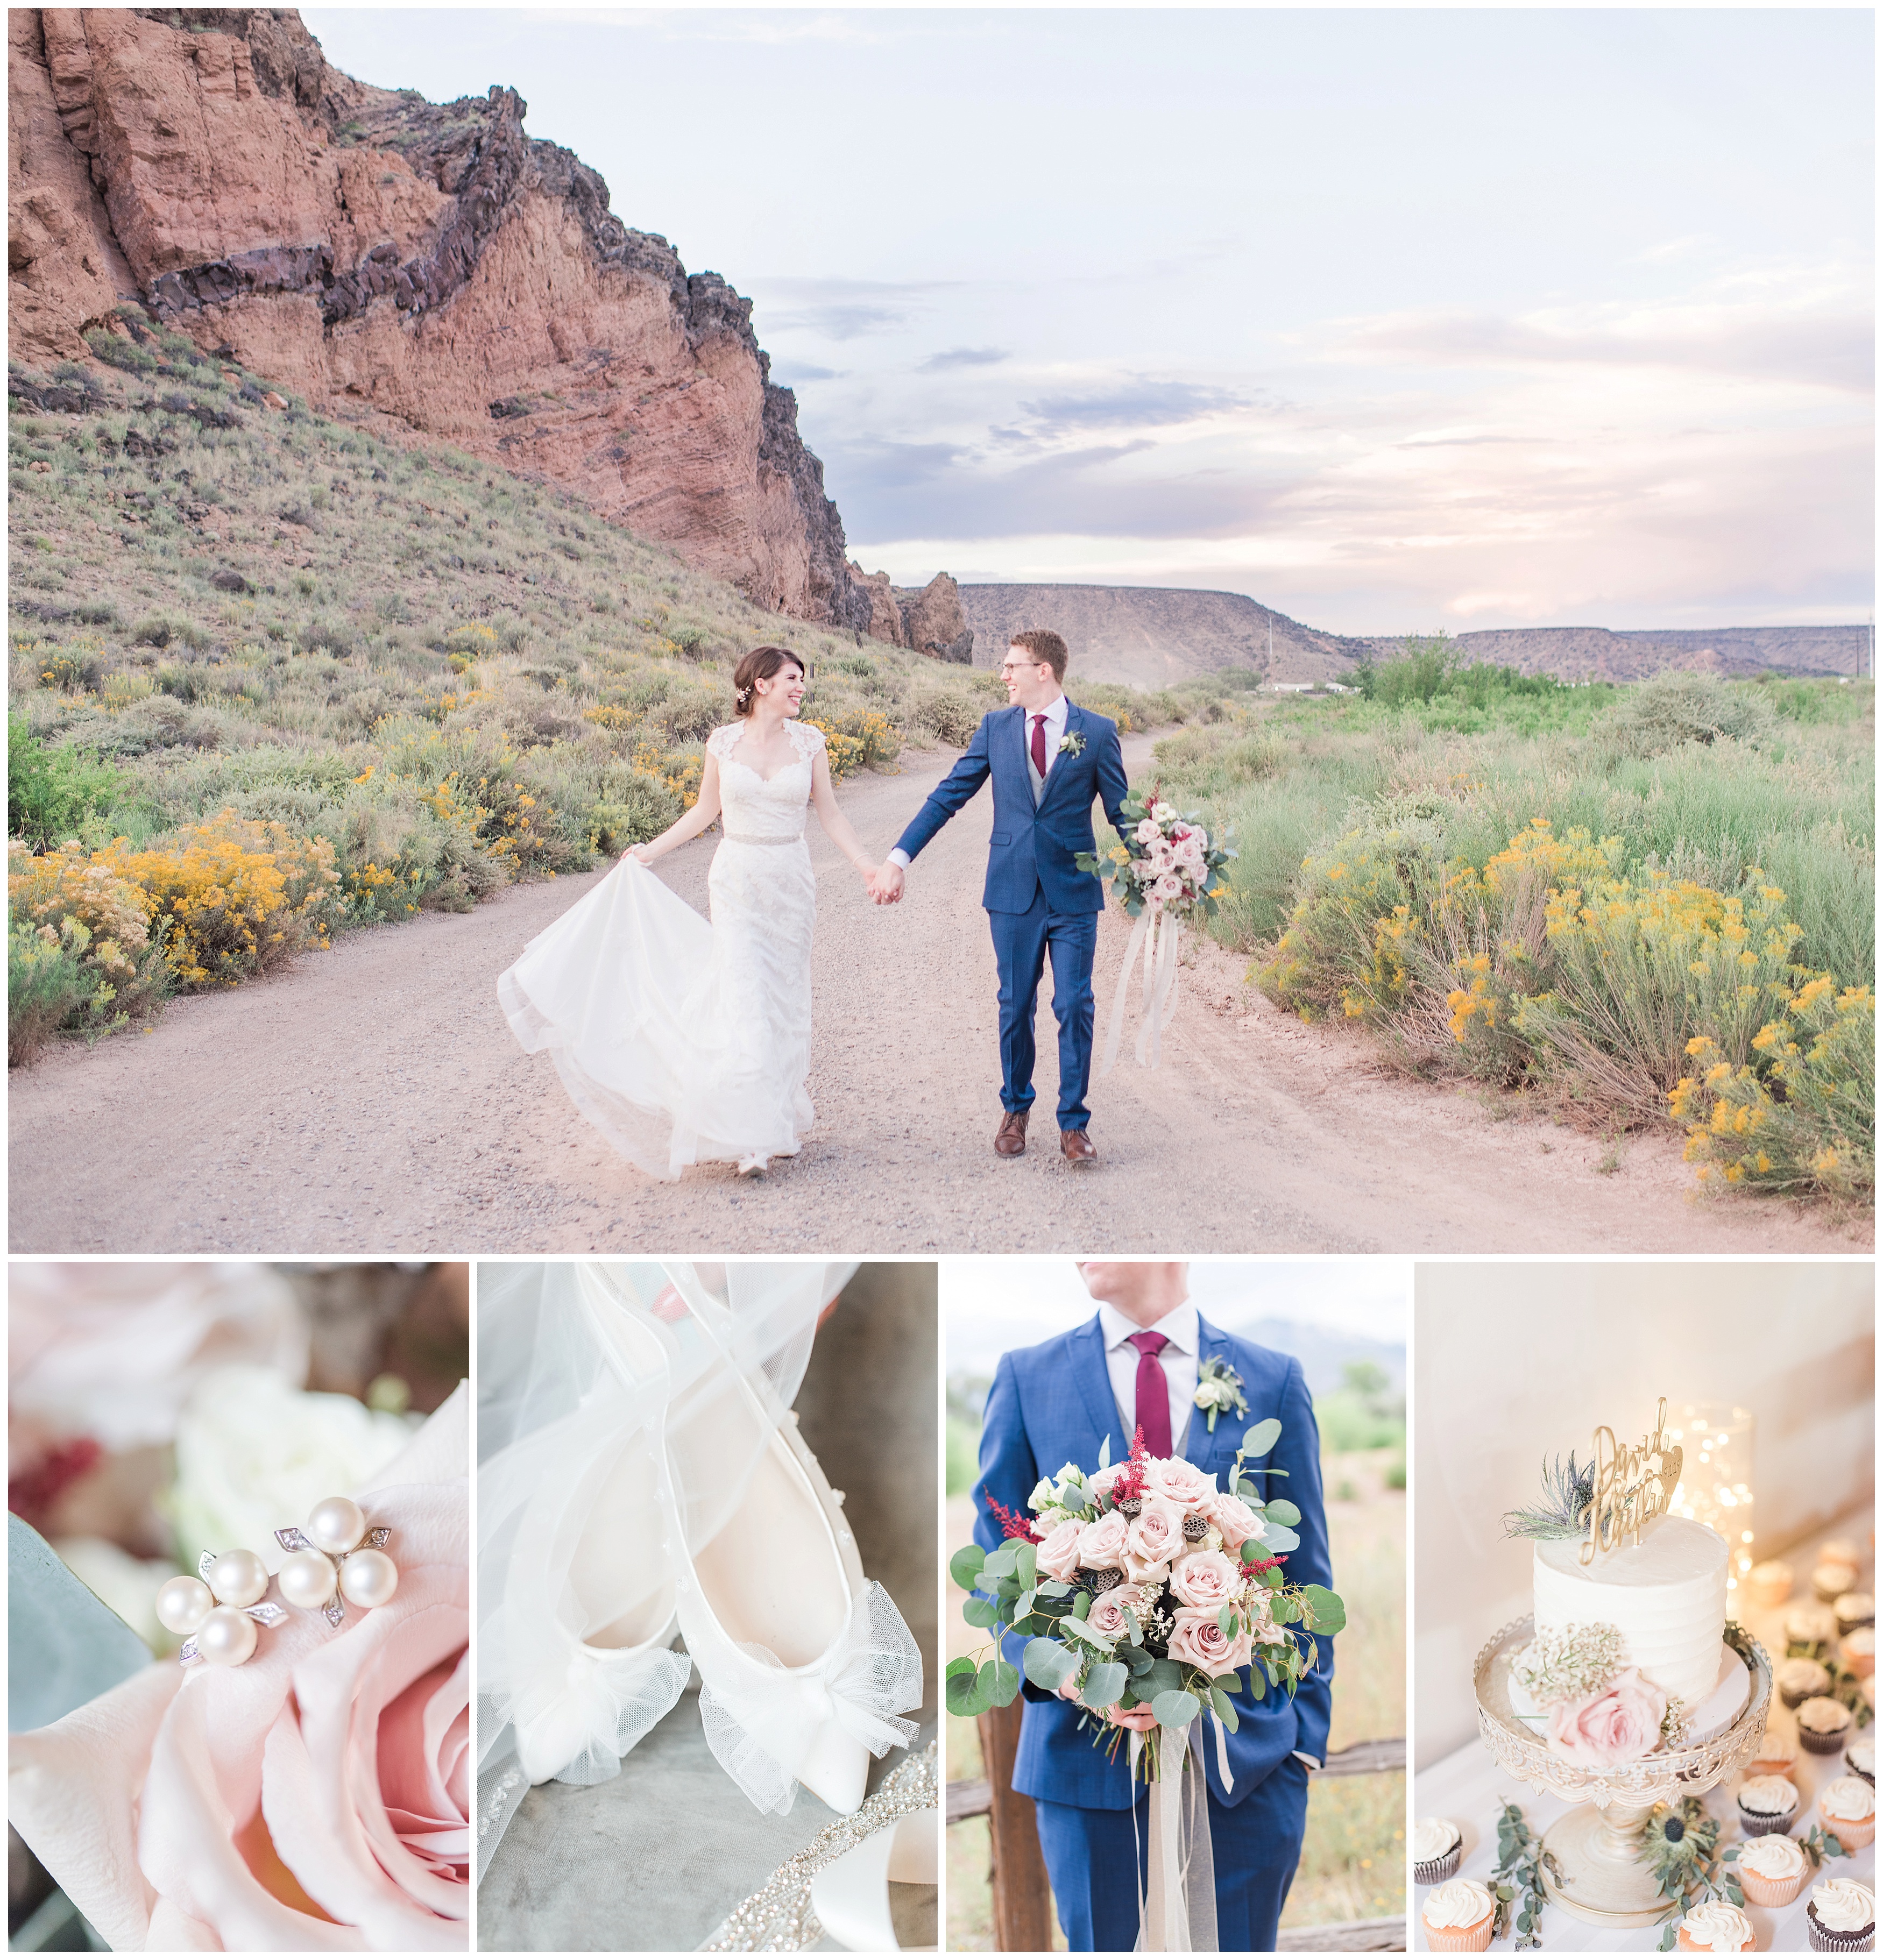 canyon rose, dusty rose wedding color inspiration with bridesmaid dresses  2019#wedding #w…